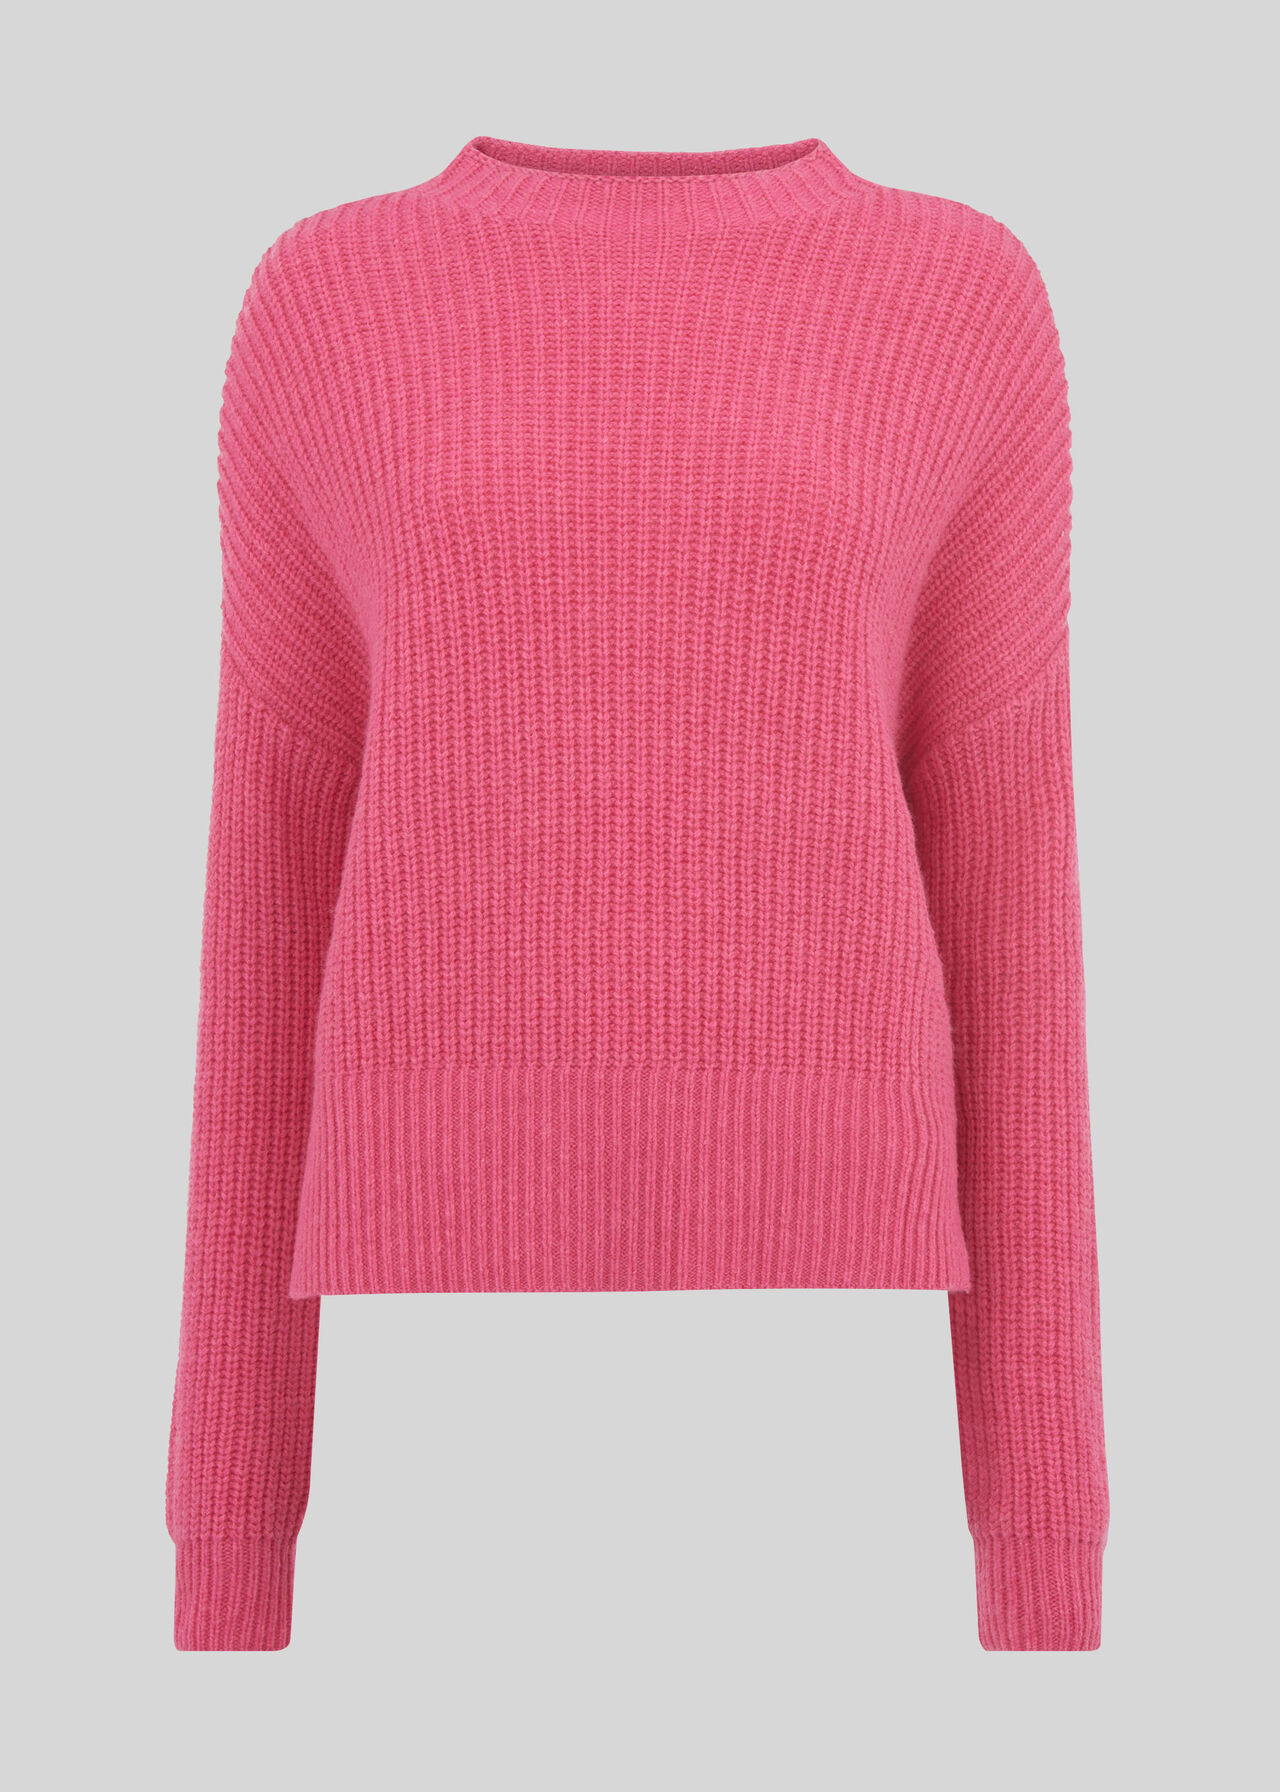 Pink Ribbed Oversized Sweater | WHISTLES